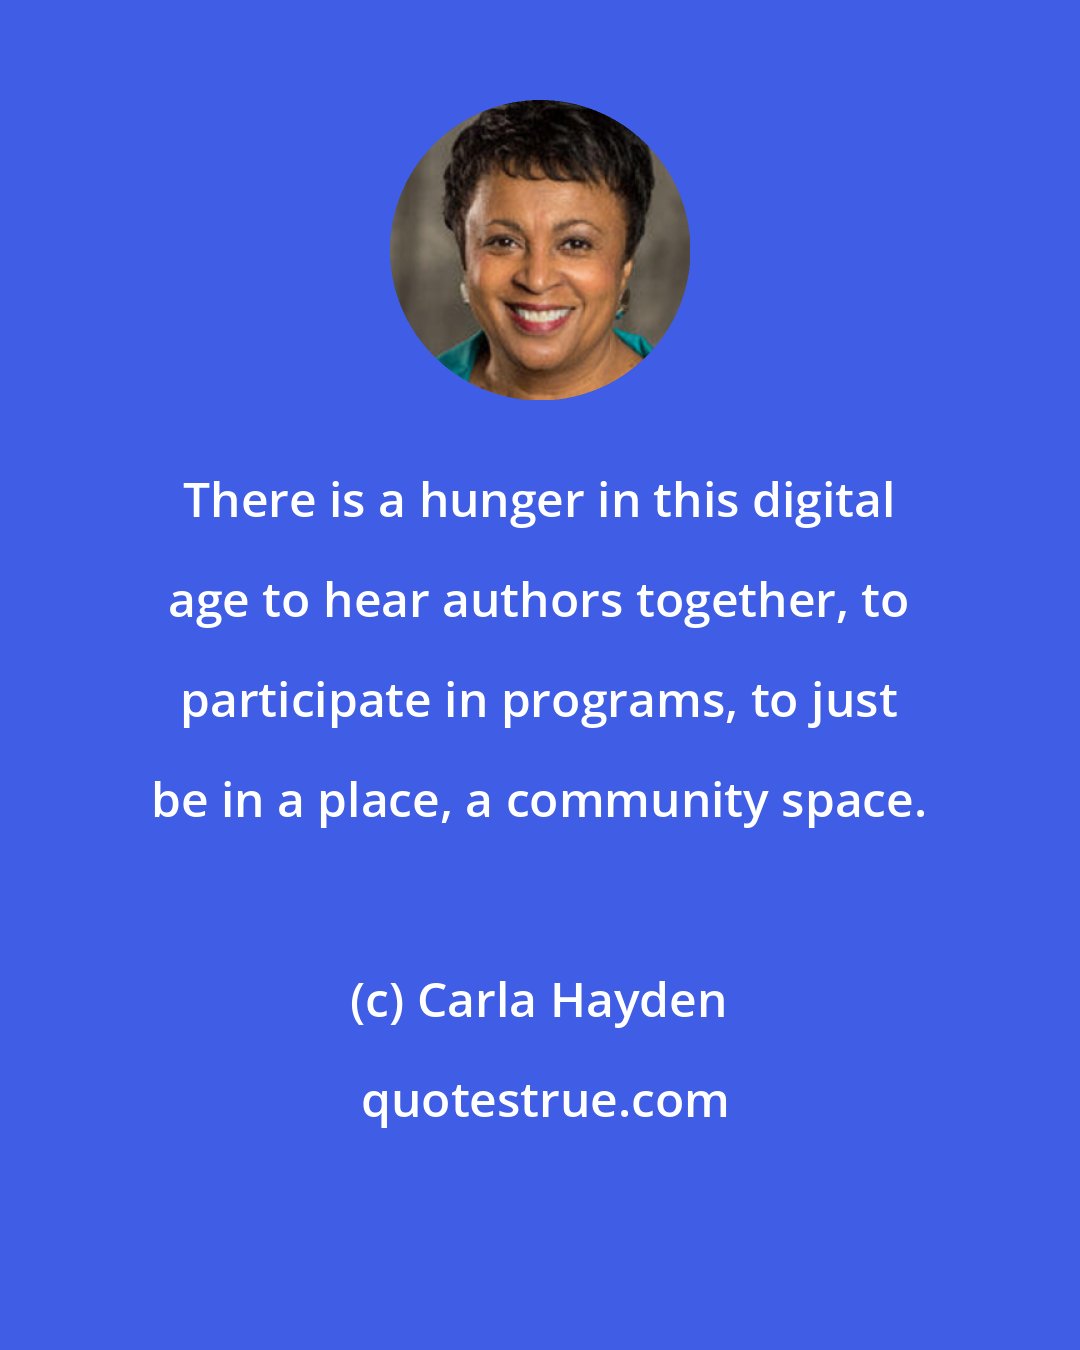 Carla Hayden: There is a hunger in this digital age to hear authors together, to participate in programs, to just be in a place, a community space.